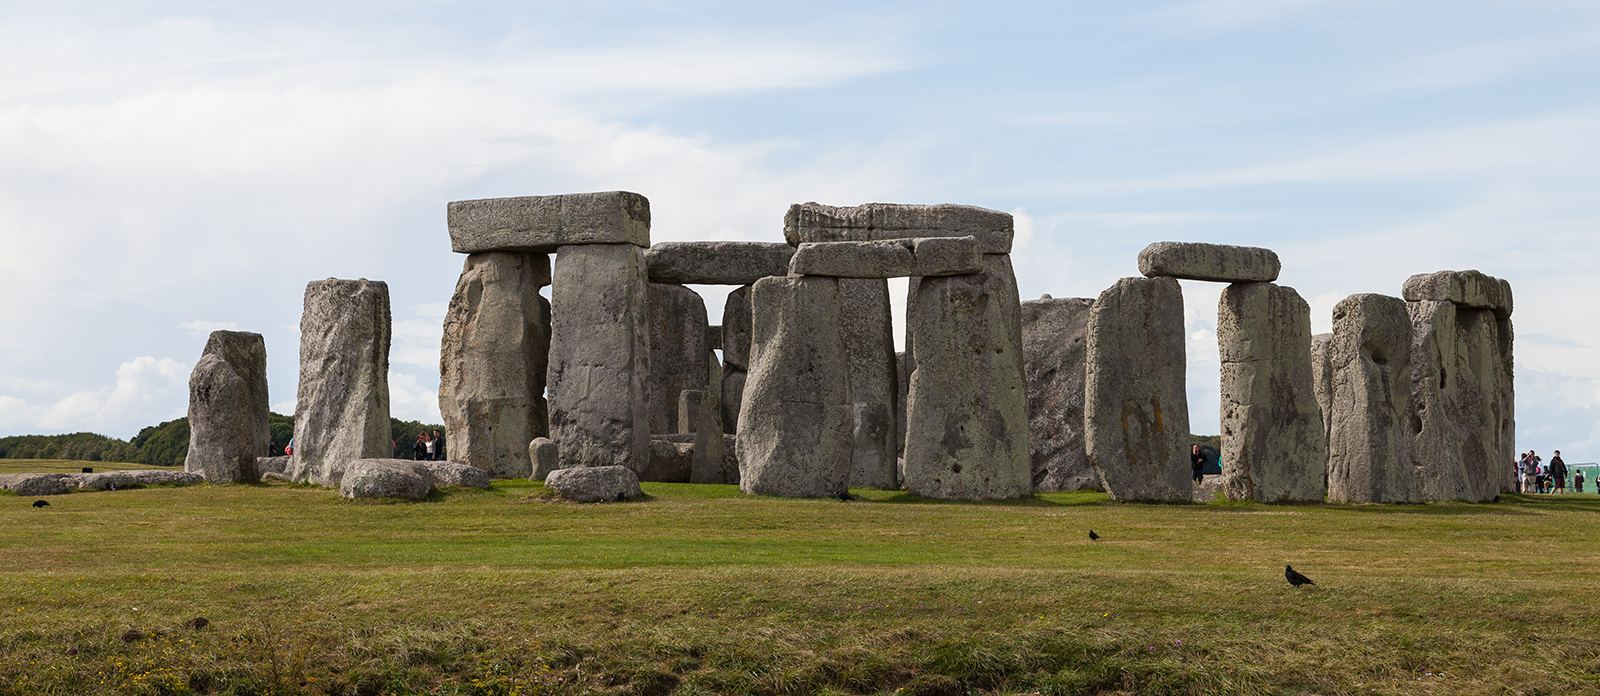 Stonehenge (wideshot) showing its colossal prehistoric ruins in full